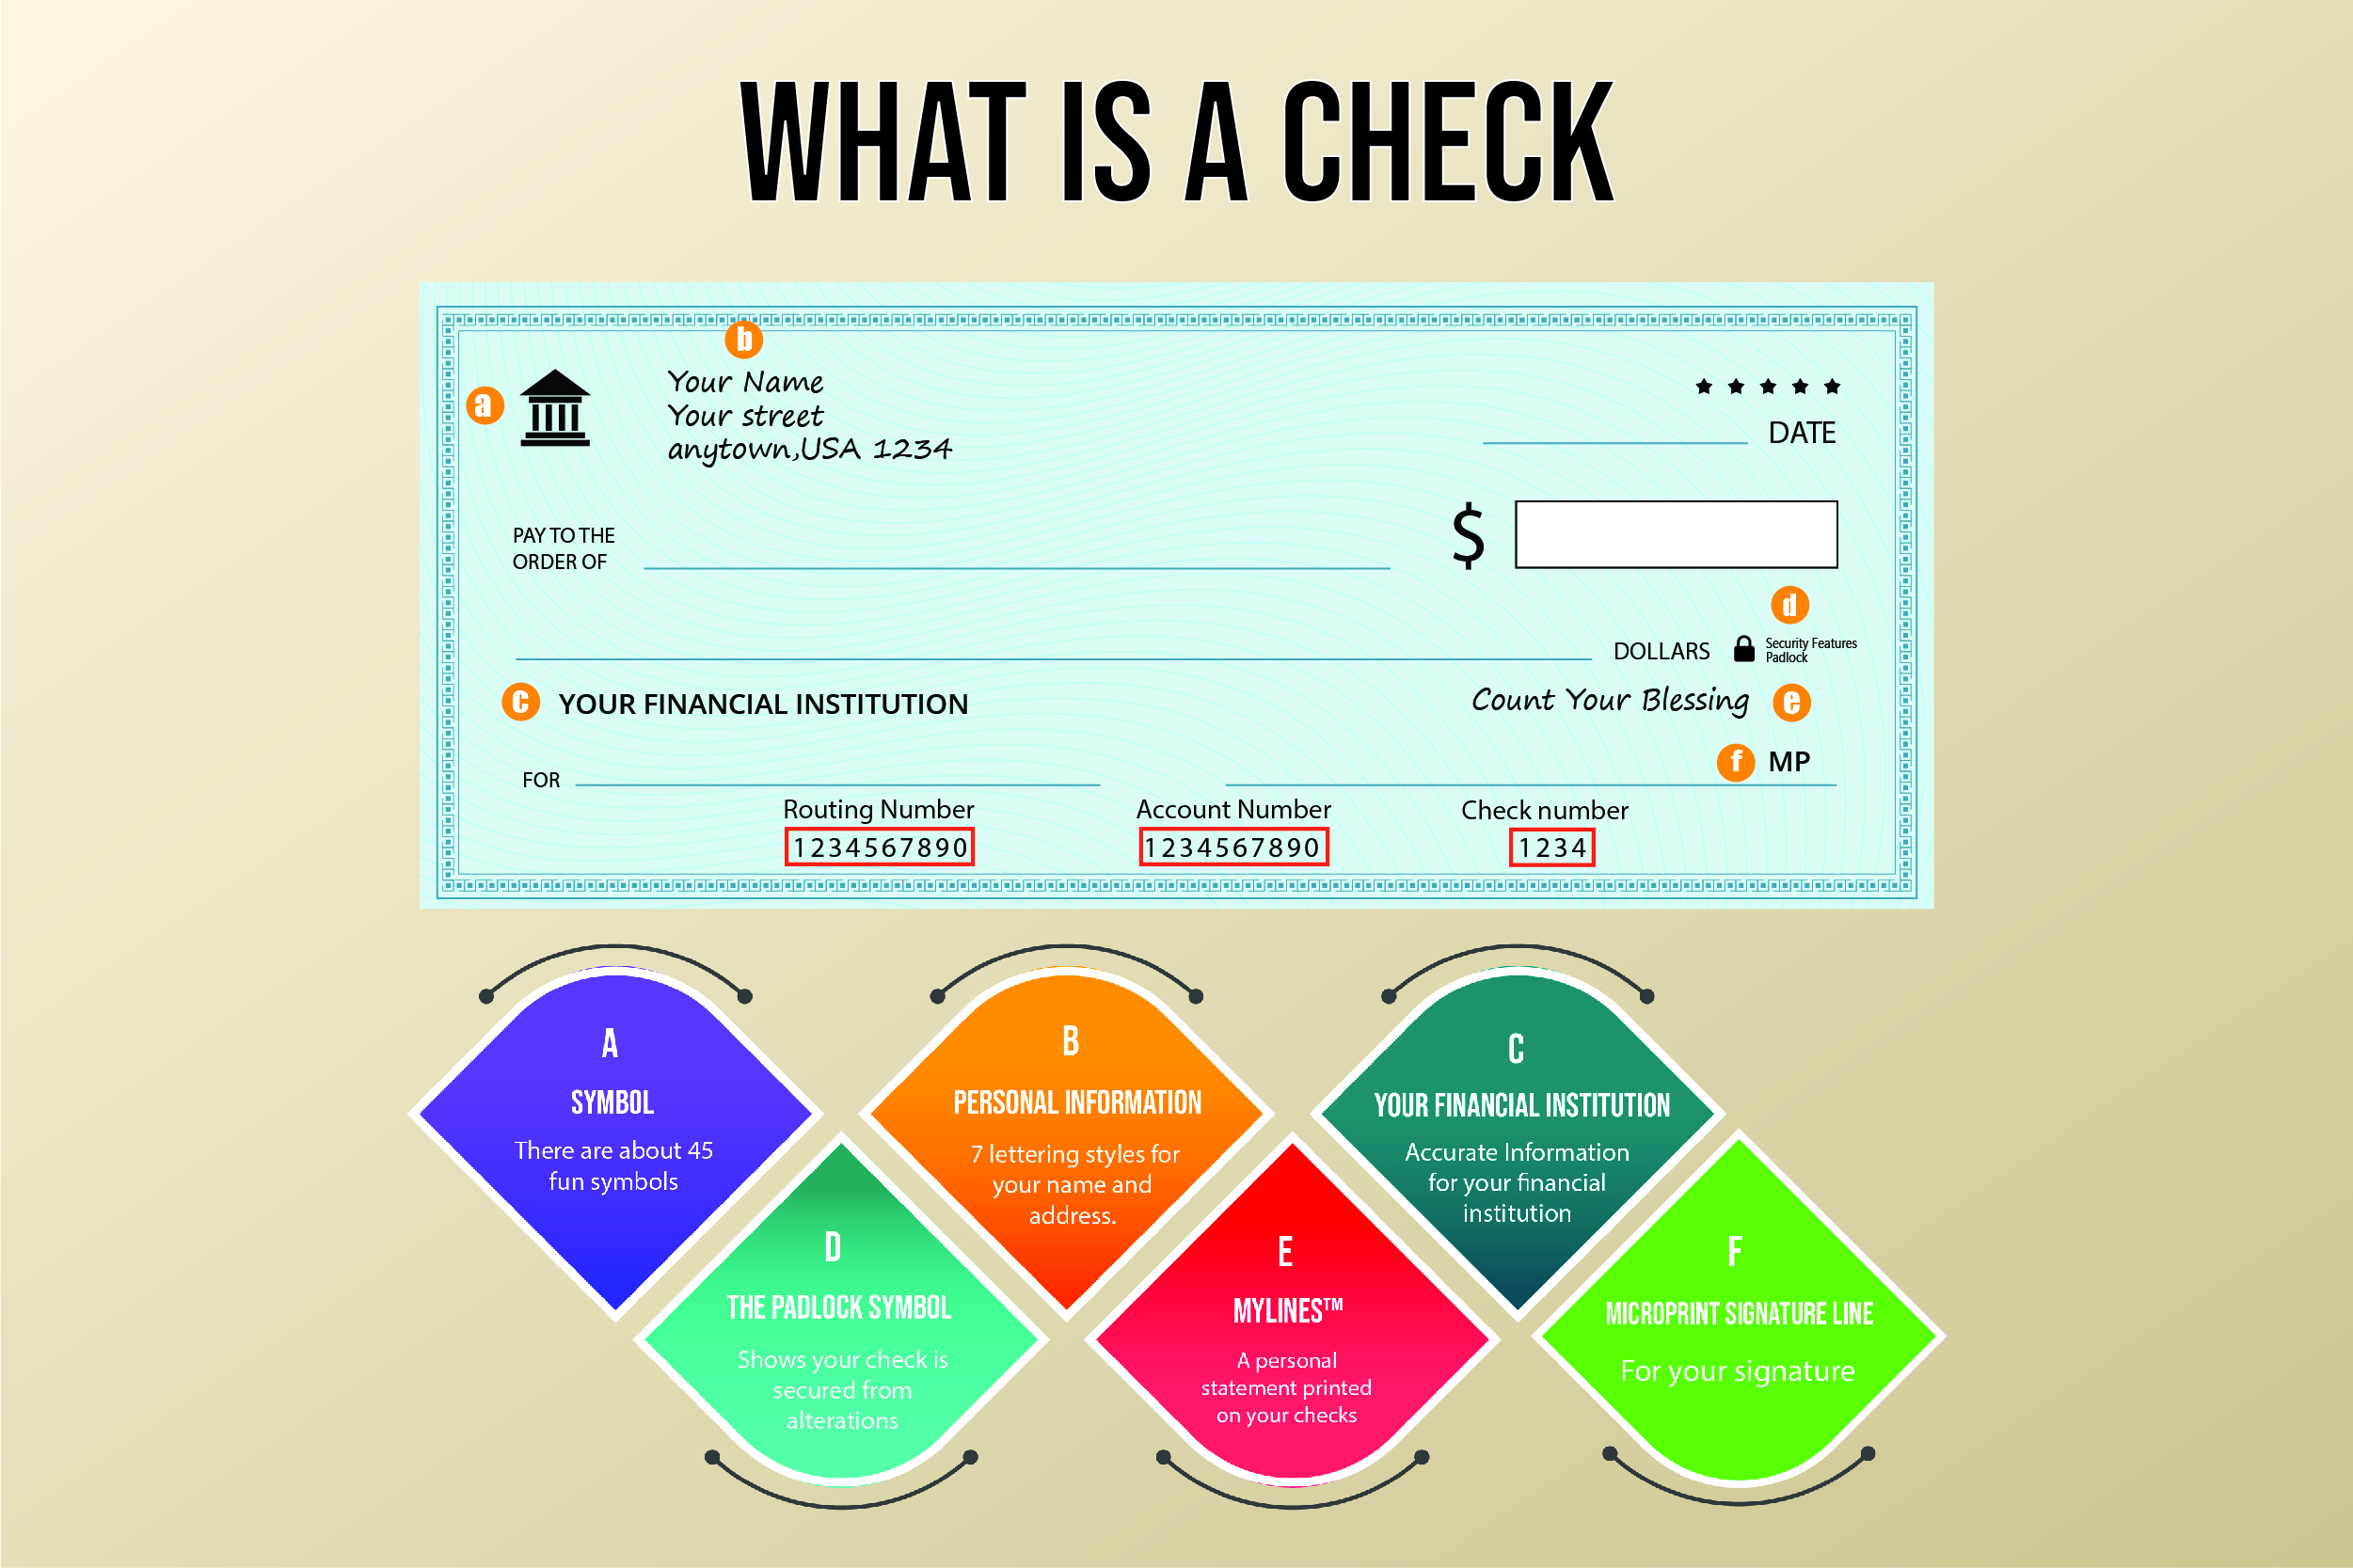 Anatomy of a check at Checks Unlimited 